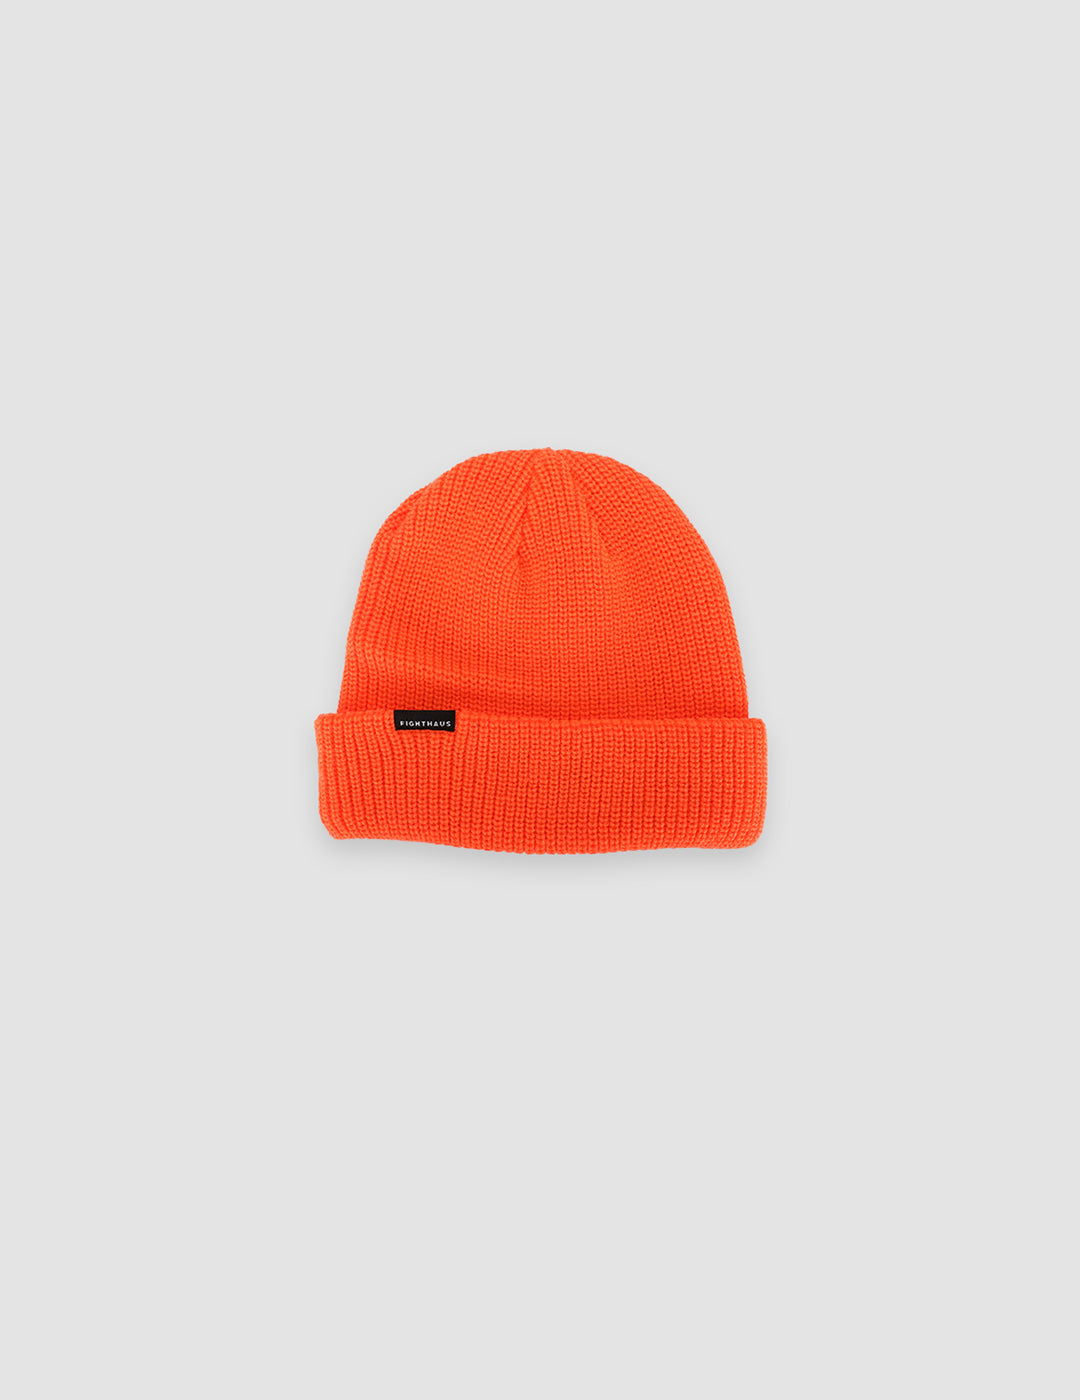 Fighthaus Orange Cuffed Beanie for Boxing, MMA and Training 2